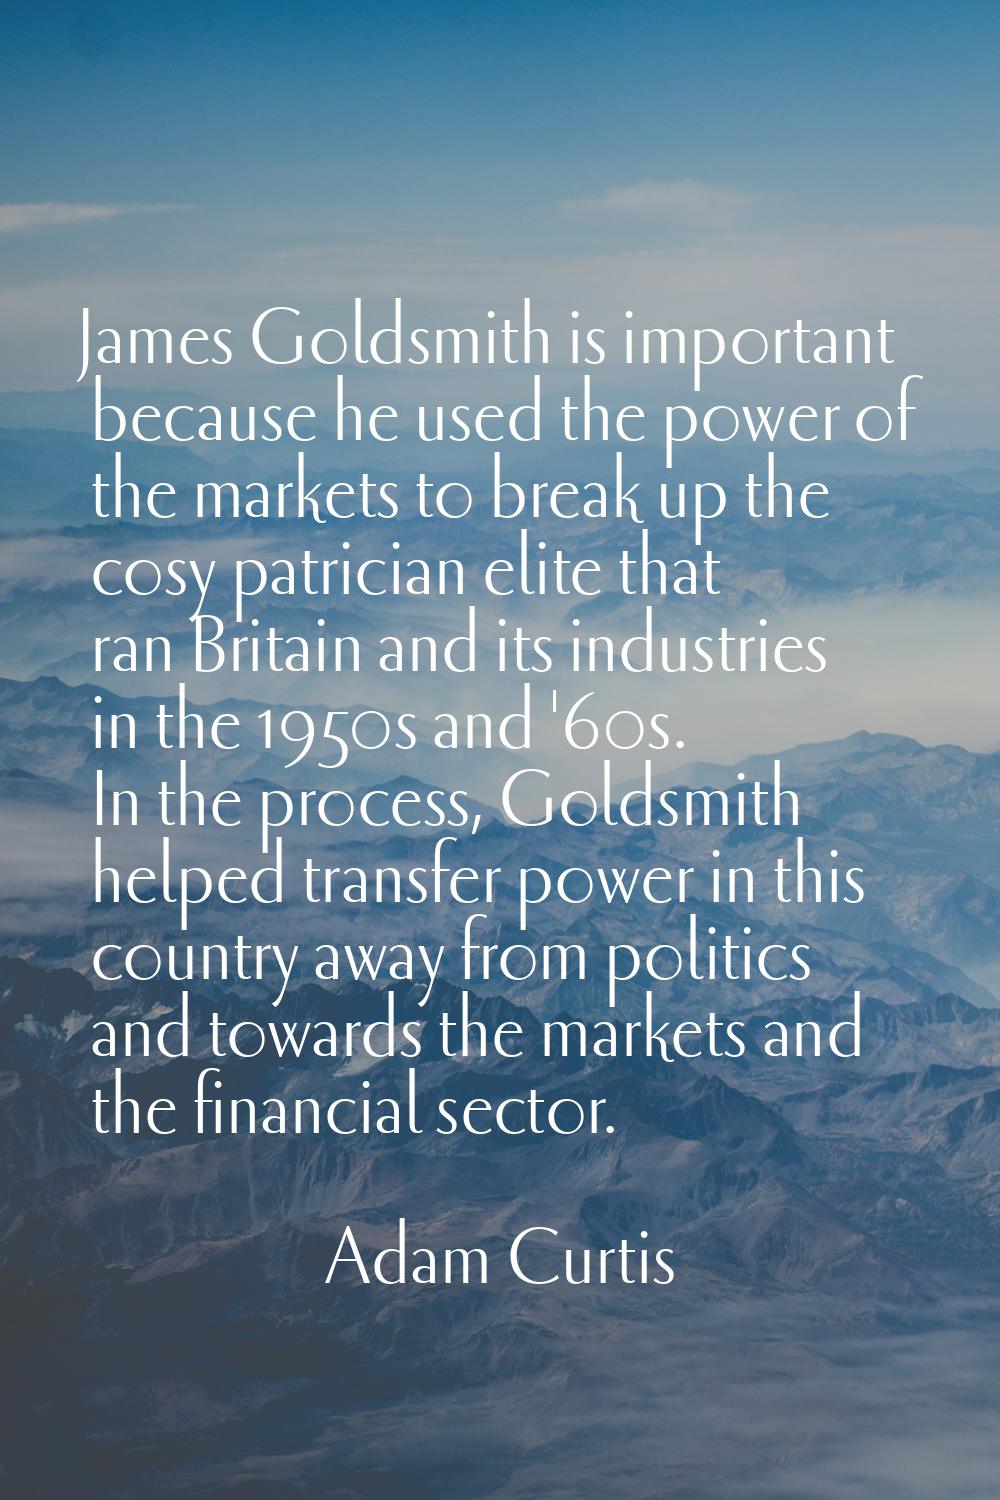 James Goldsmith is important because he used the power of the markets to break up the cosy patricia